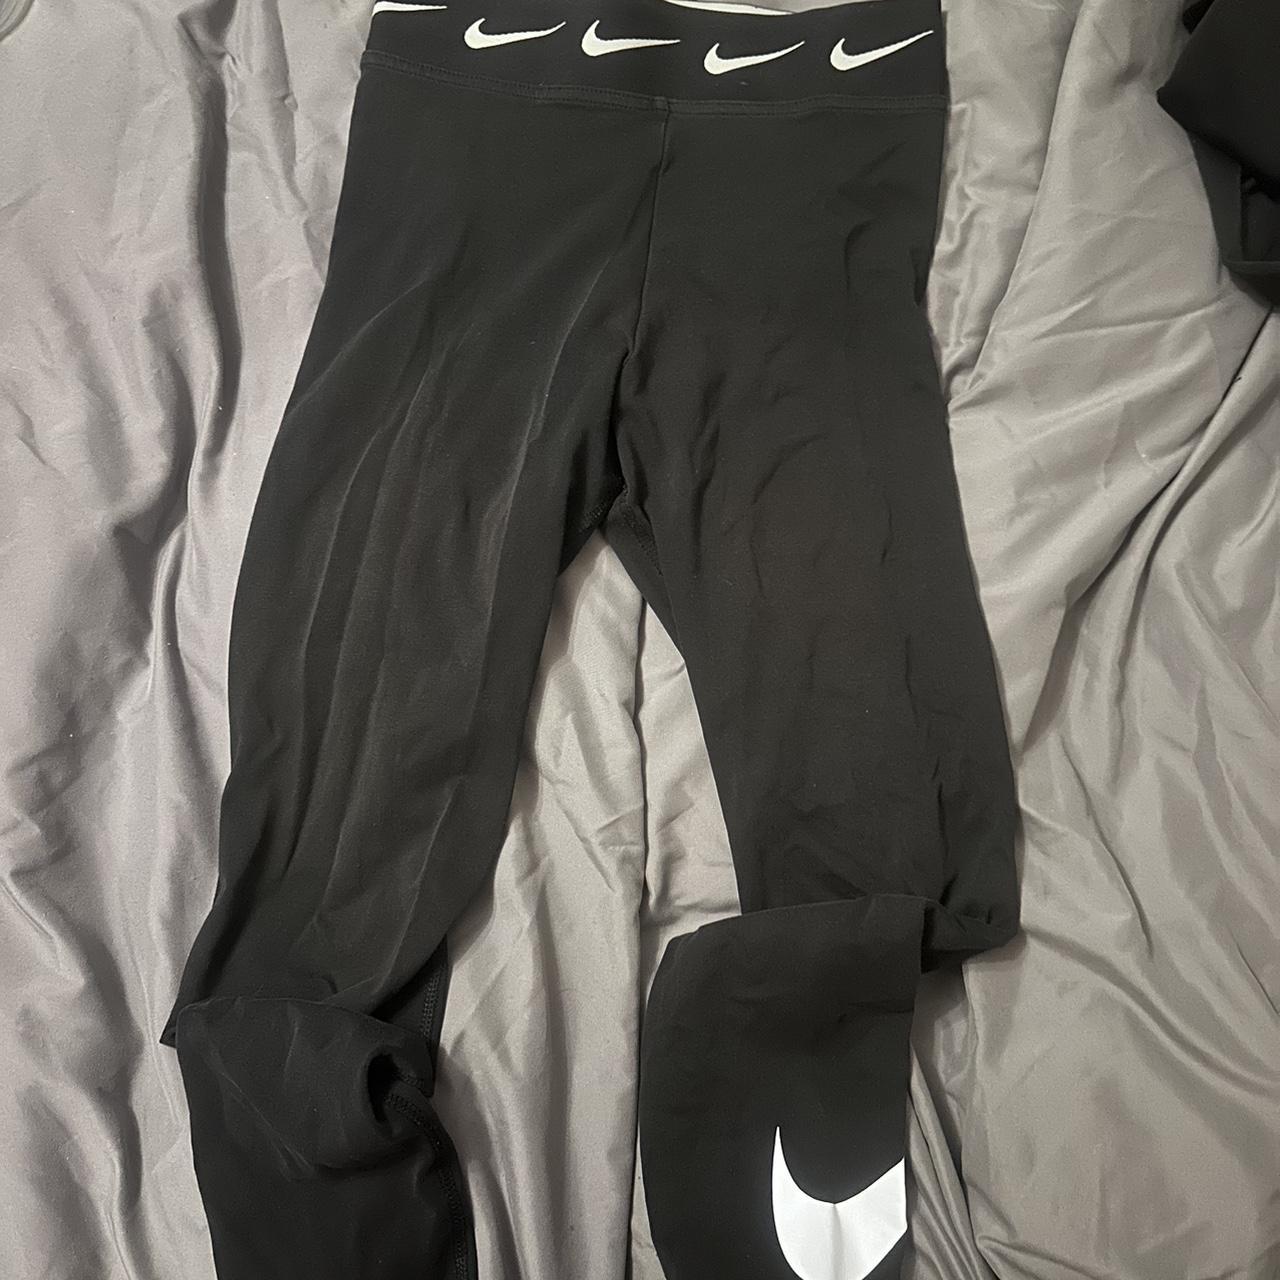 Black nike leggings🤍 size small would be able to fit - Depop